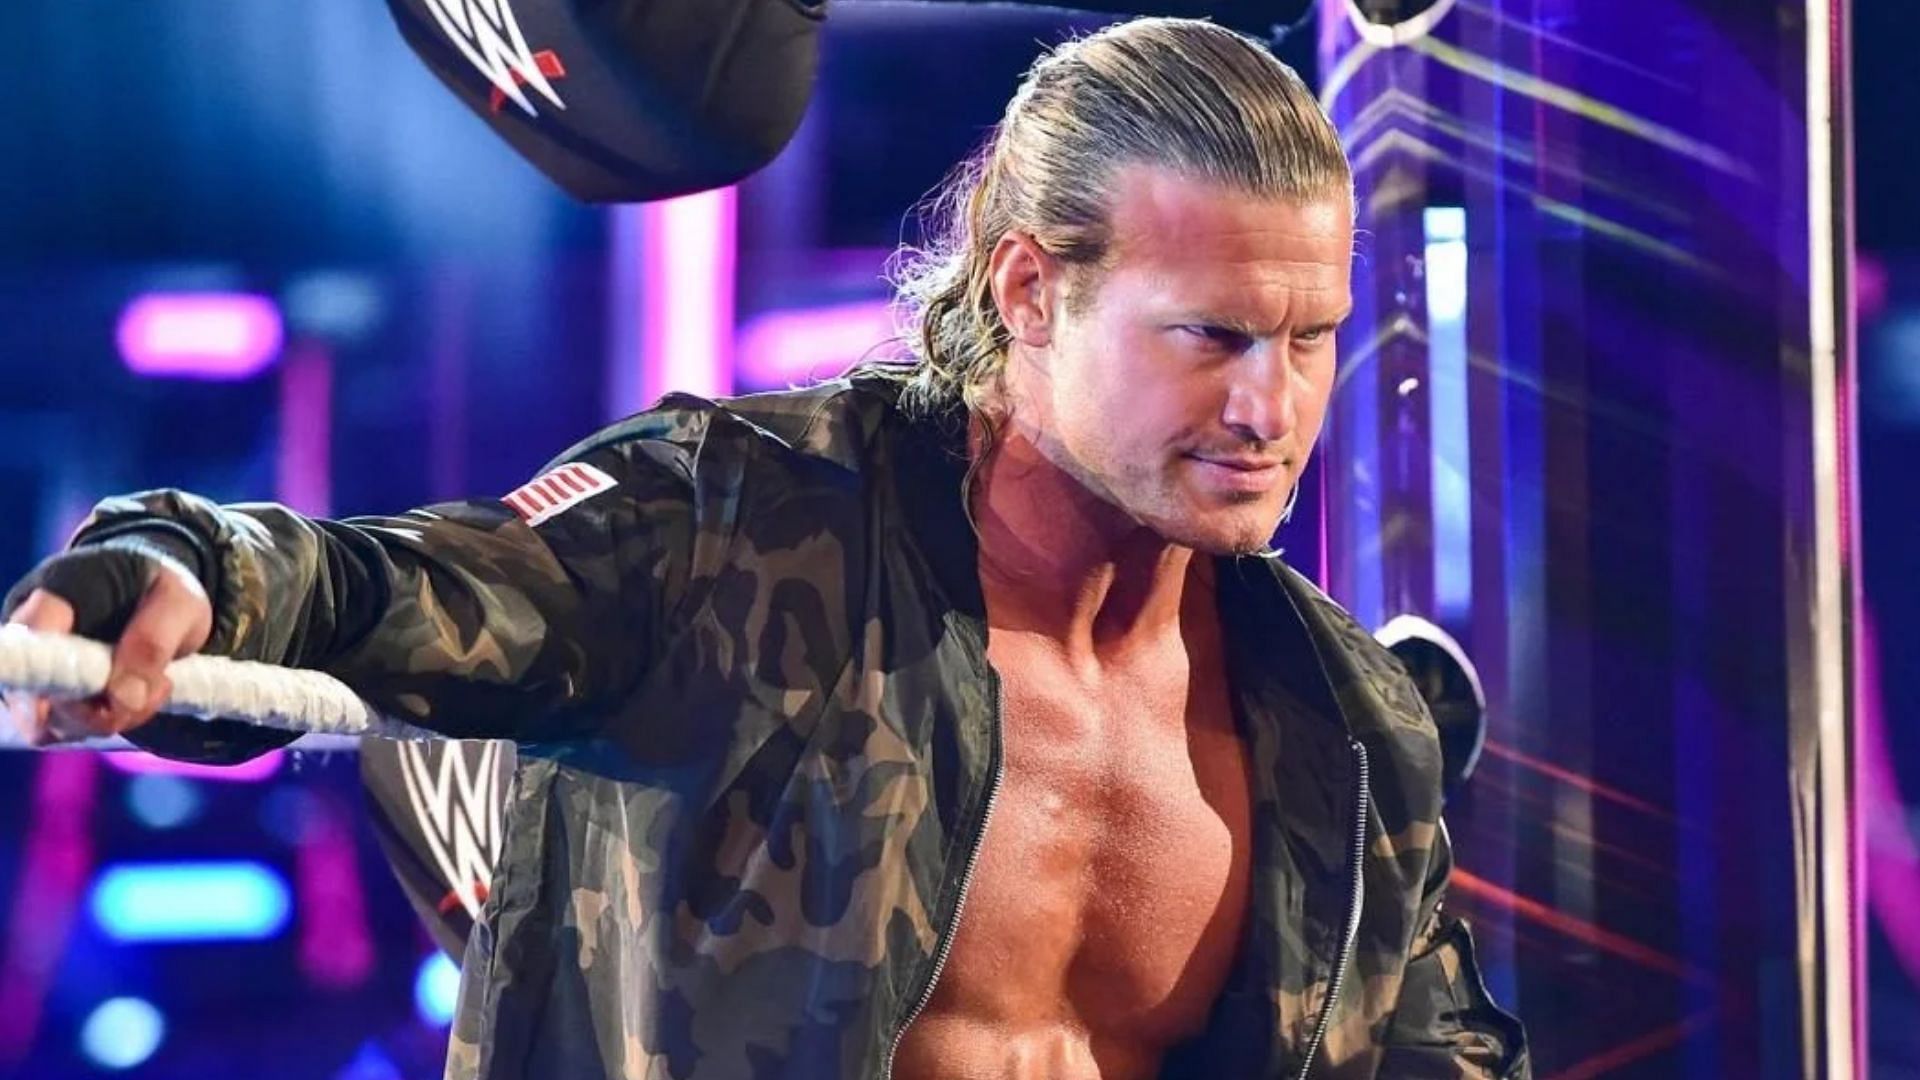 Dolph Ziggler is a multi time World Champion in WWE